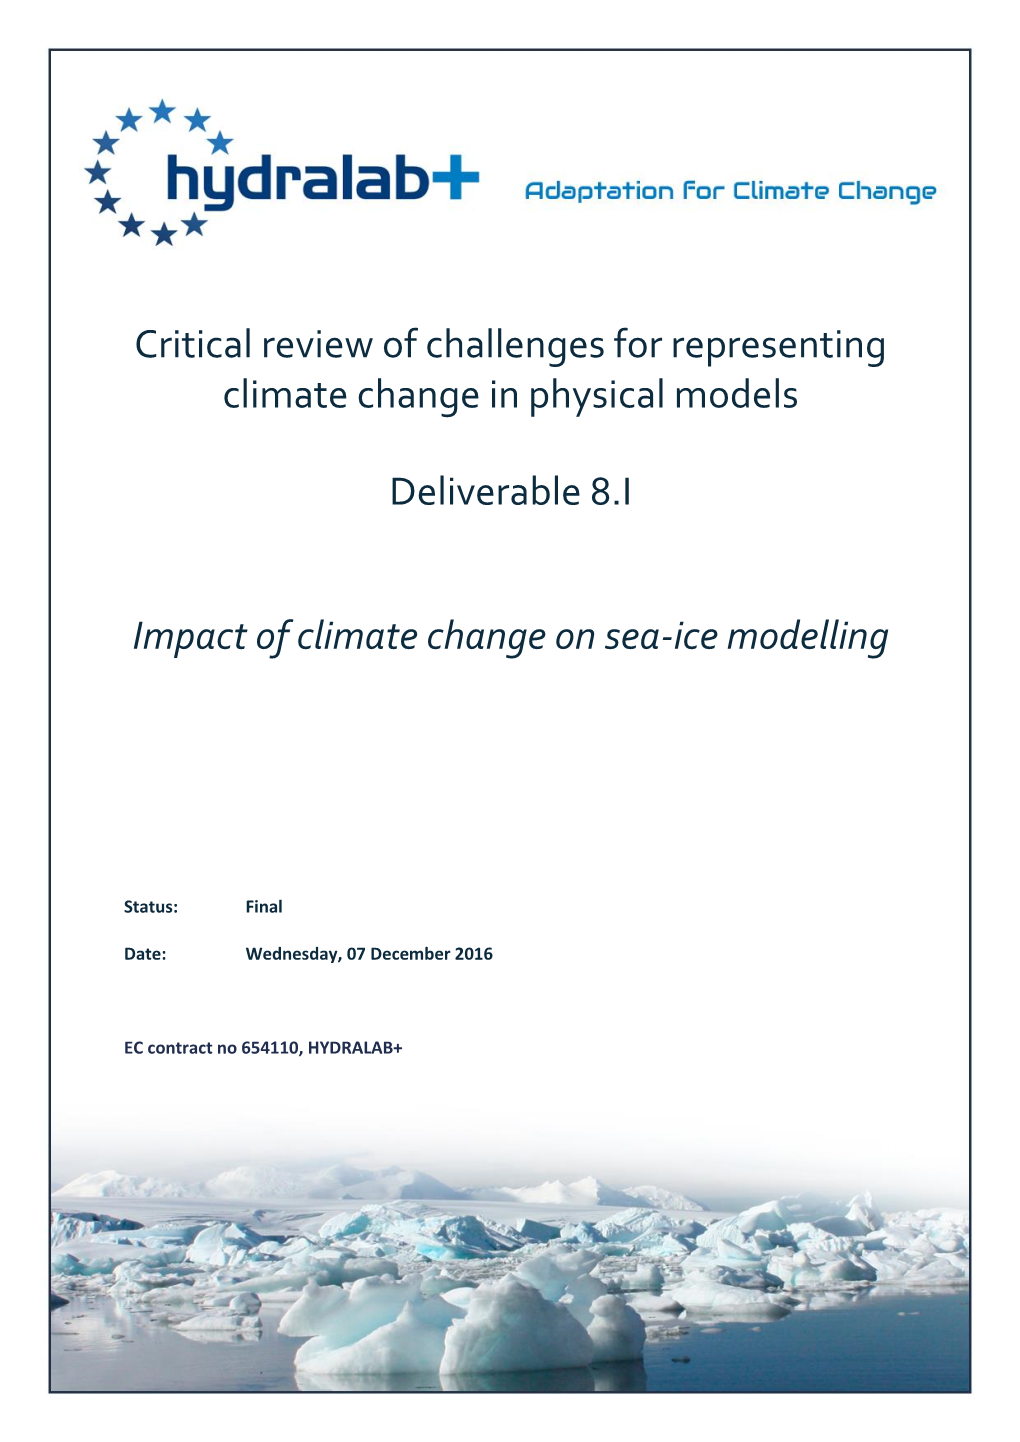 Impact of Climate Change on Sea-Ice Modelling